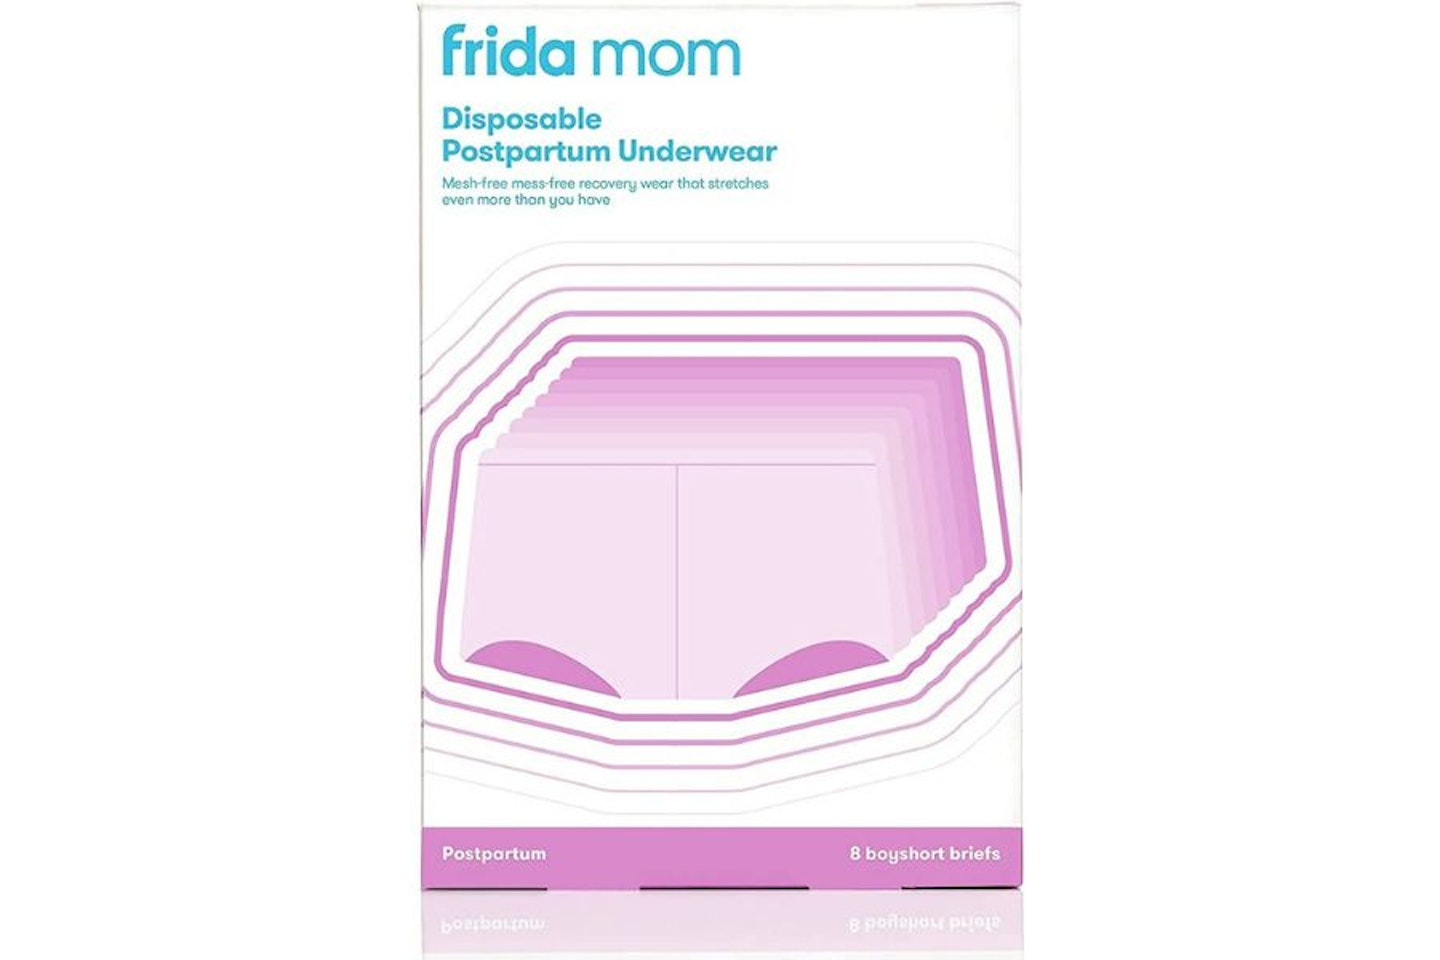 Pregnant mamas you need our disposable postpartum underwear #baby #mum